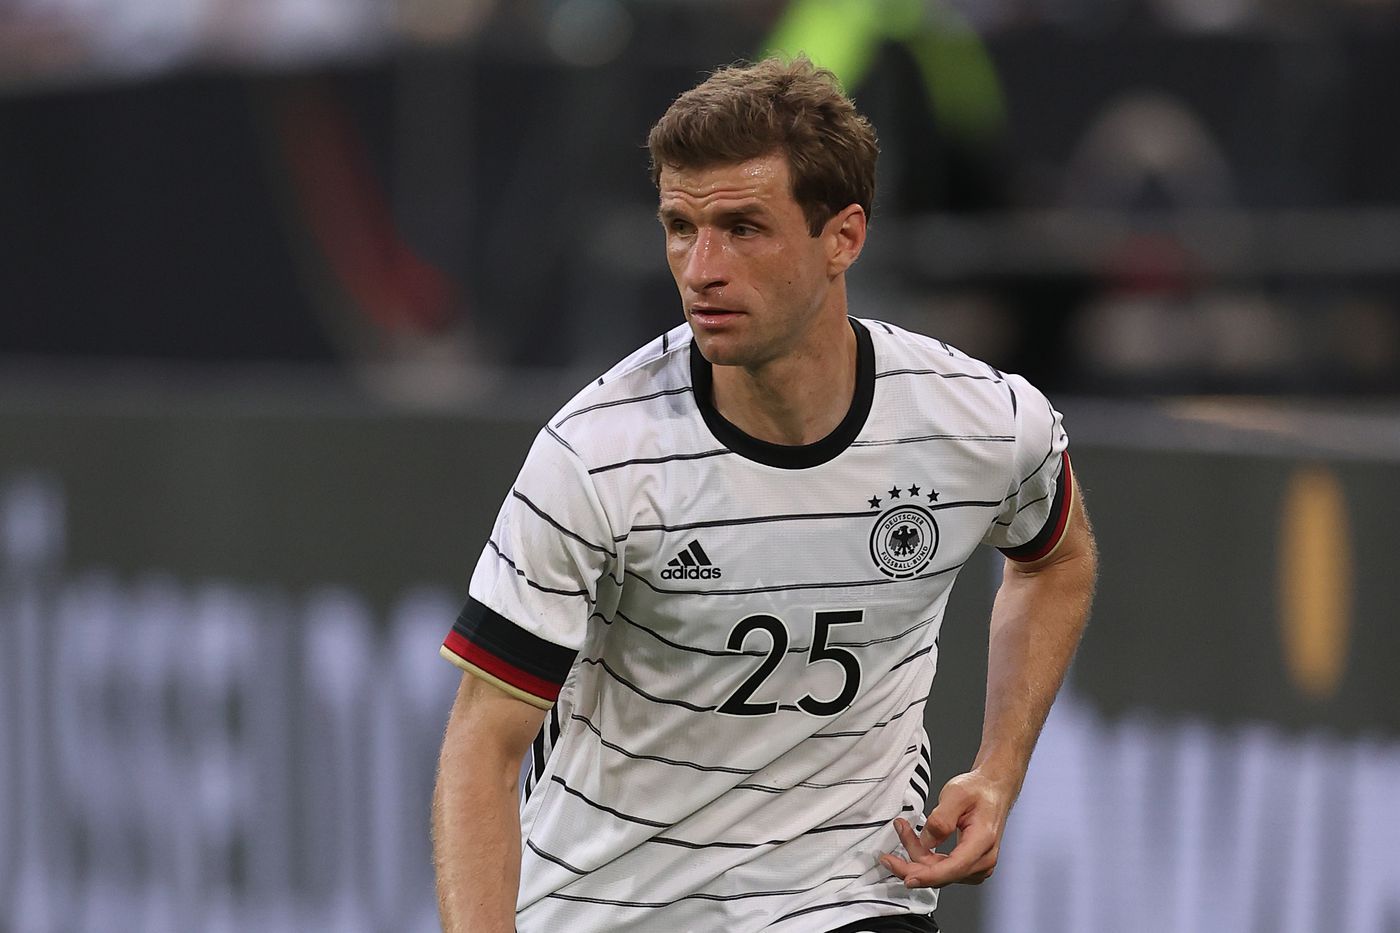 Germany's Thomas Müller happy with win over Latvia, but knows the real challenge lies ahead Football Works